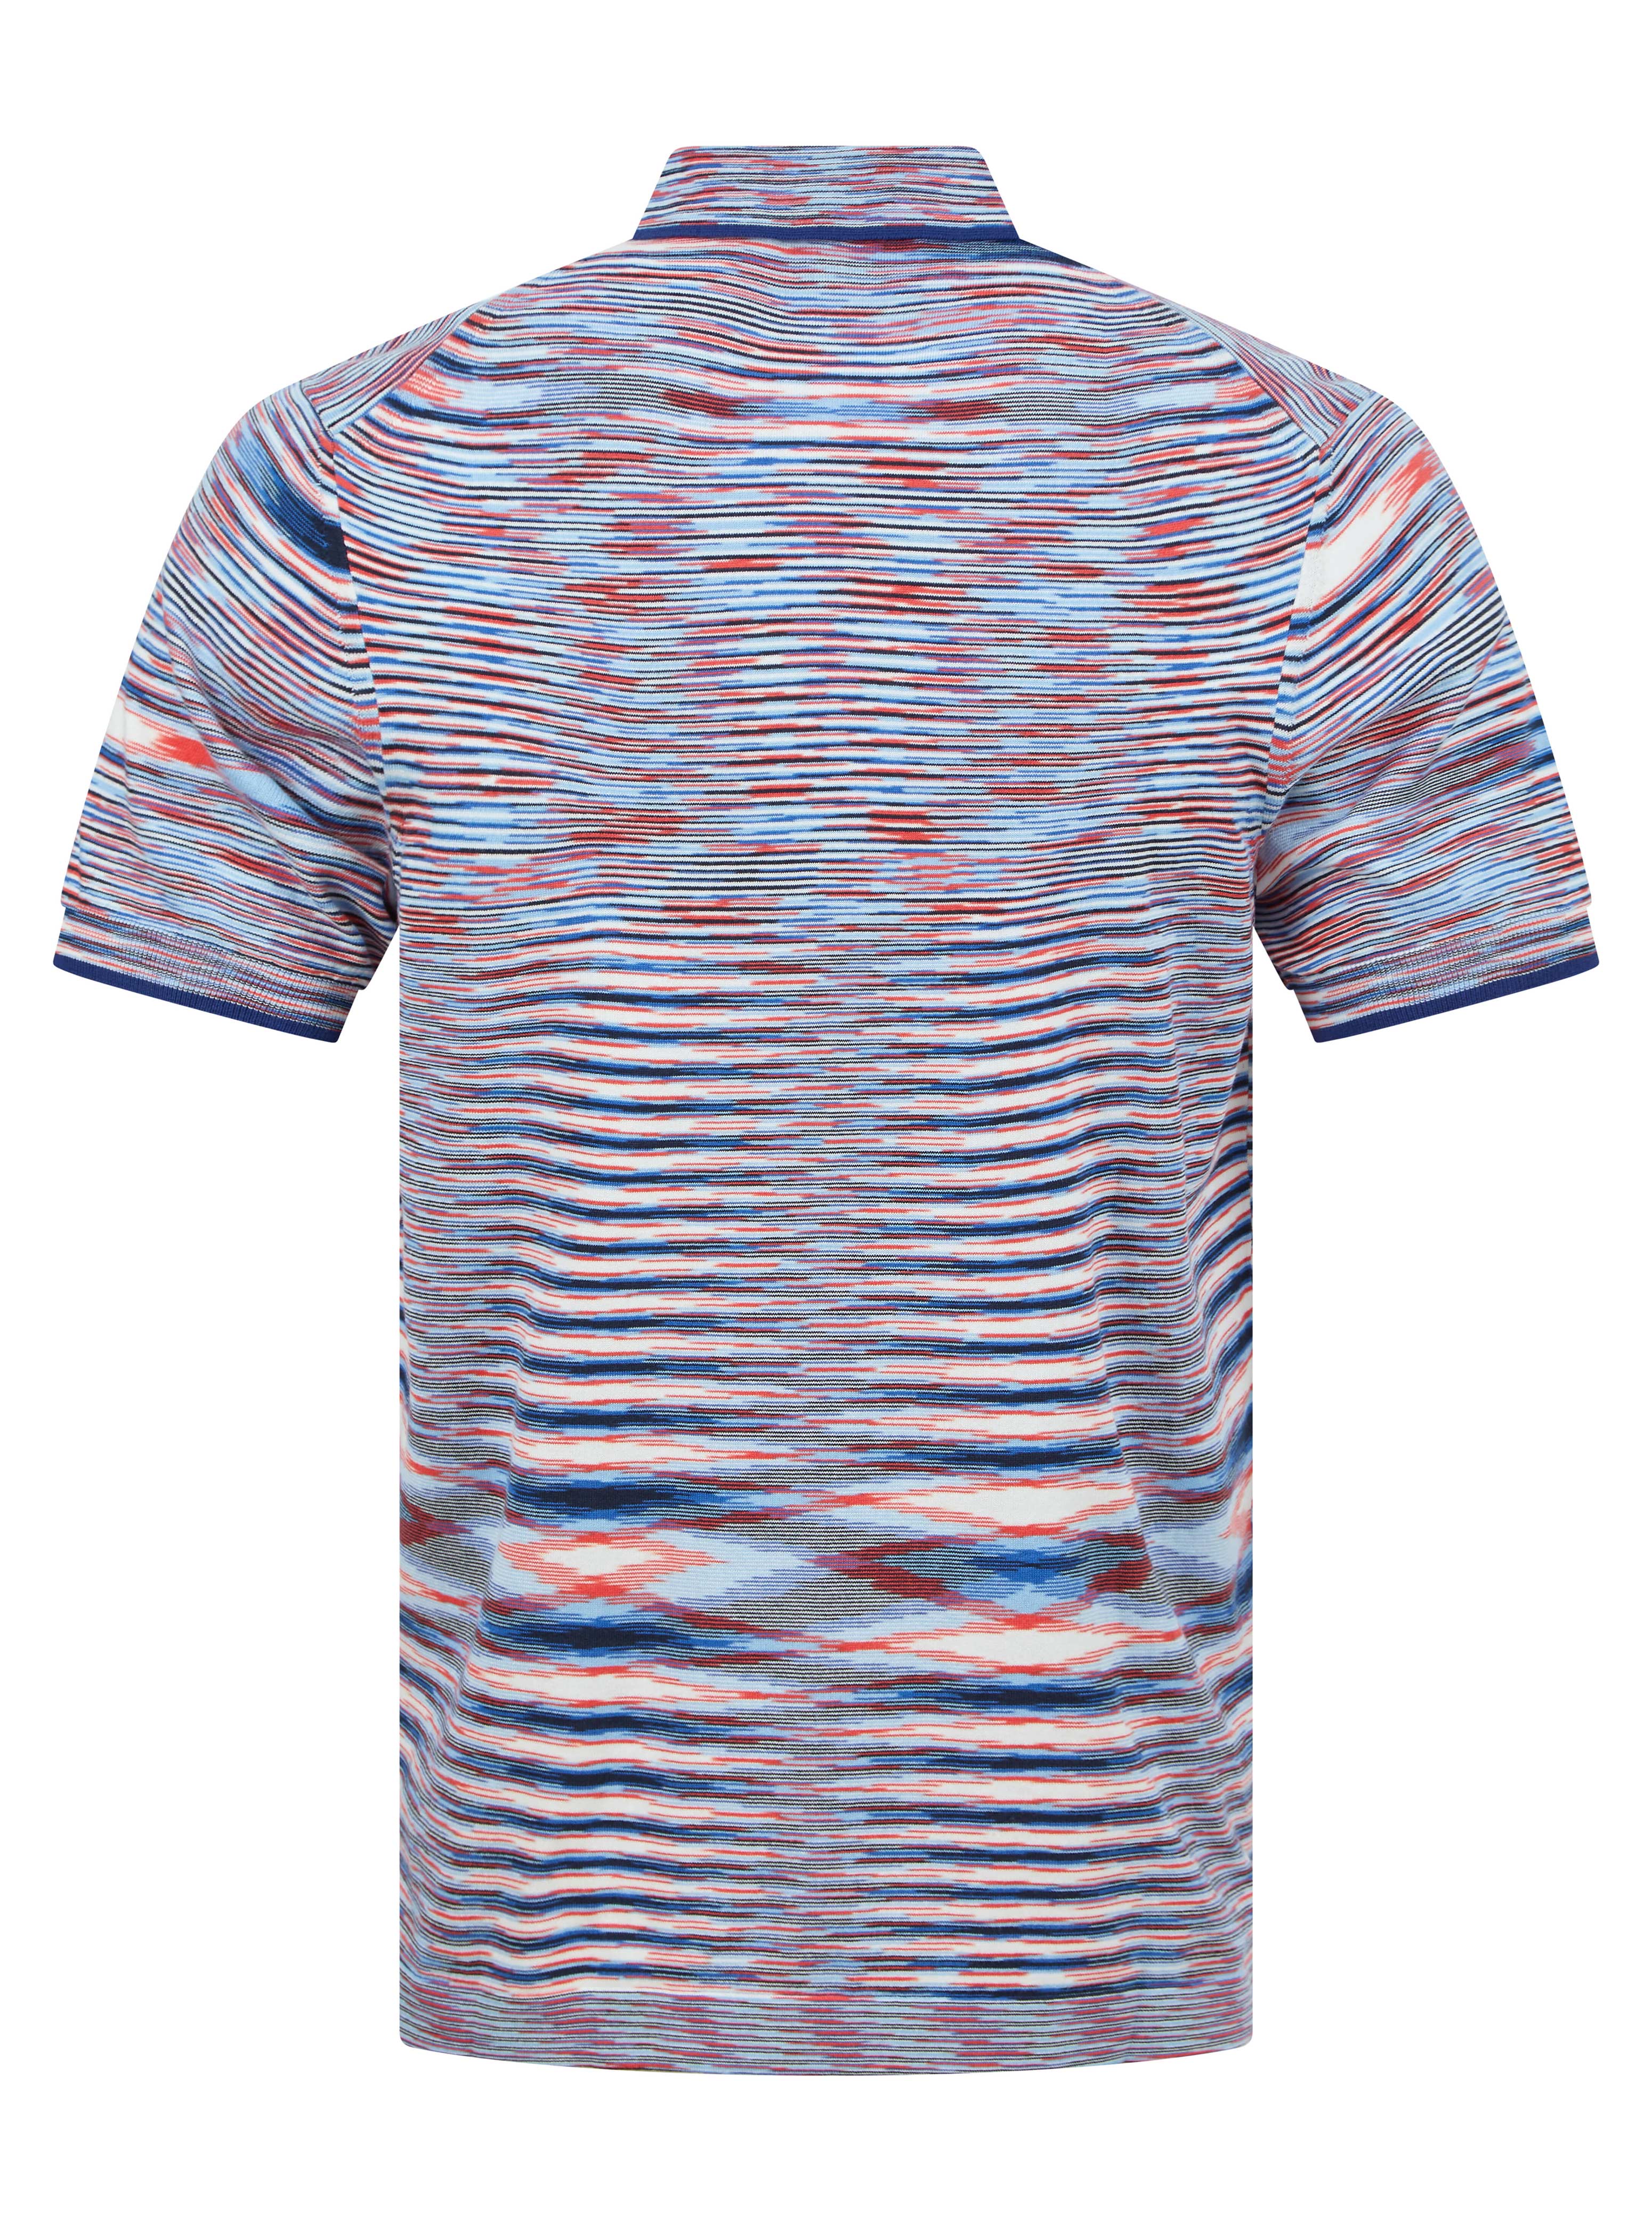 Load image into Gallery viewer, Missoni Multi Stripe Polo Knit Red
